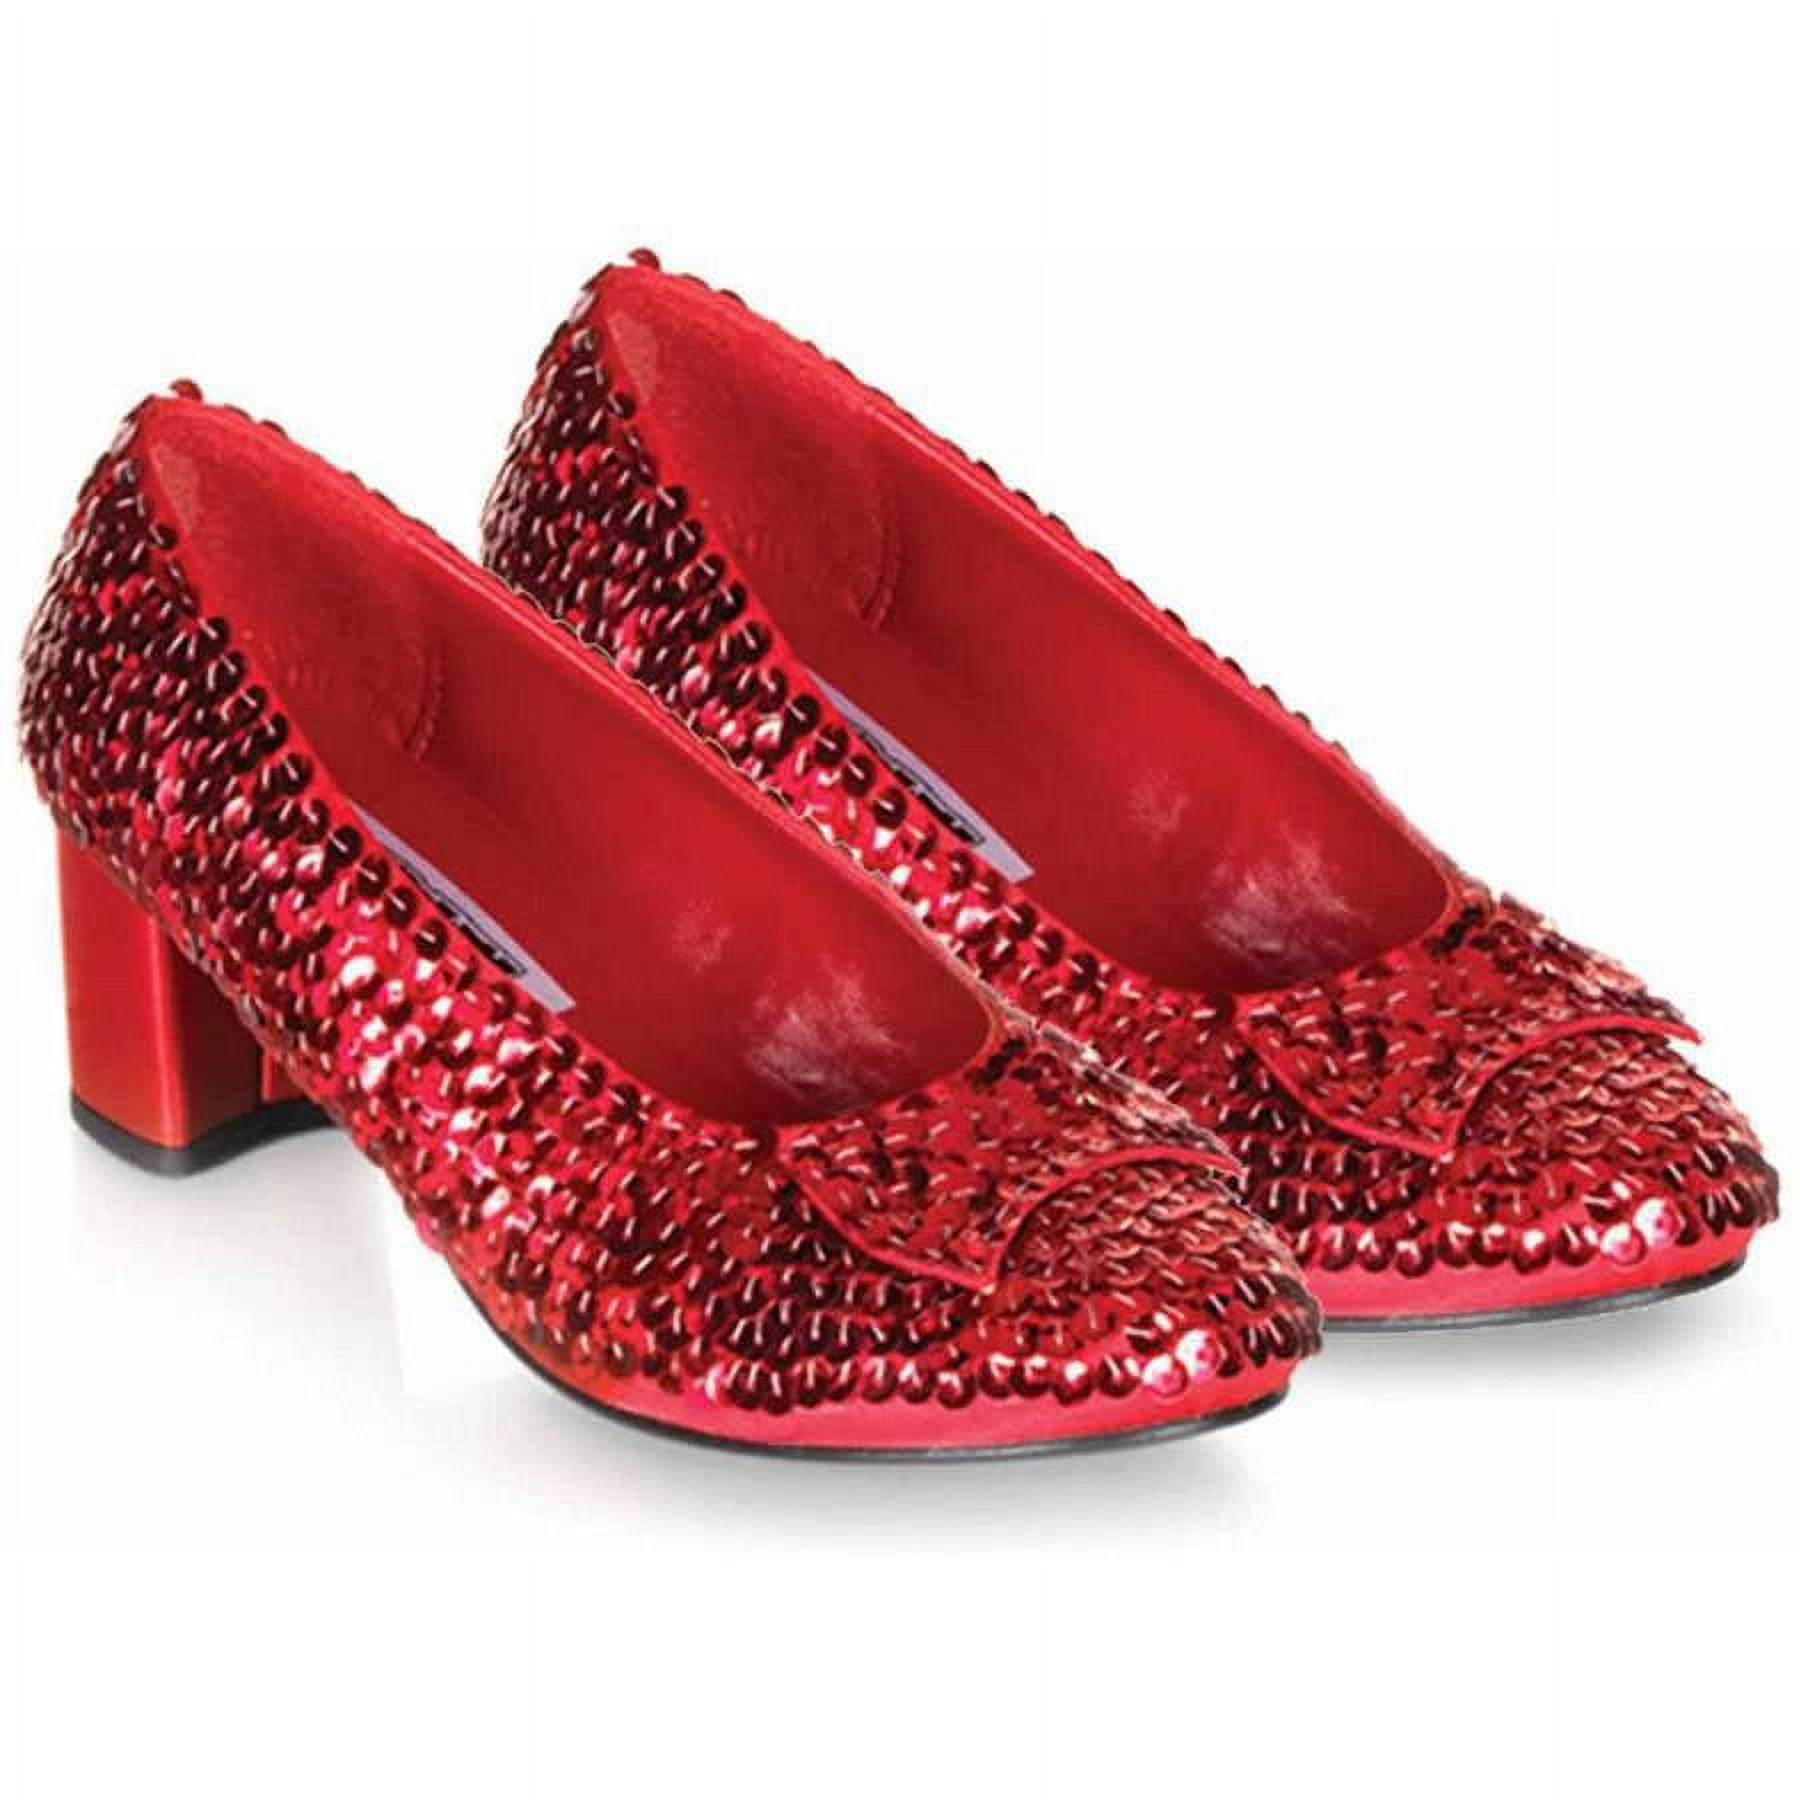 Judy Red Sequin Shoes Girls' Child Costume Accessory - Walmart.com